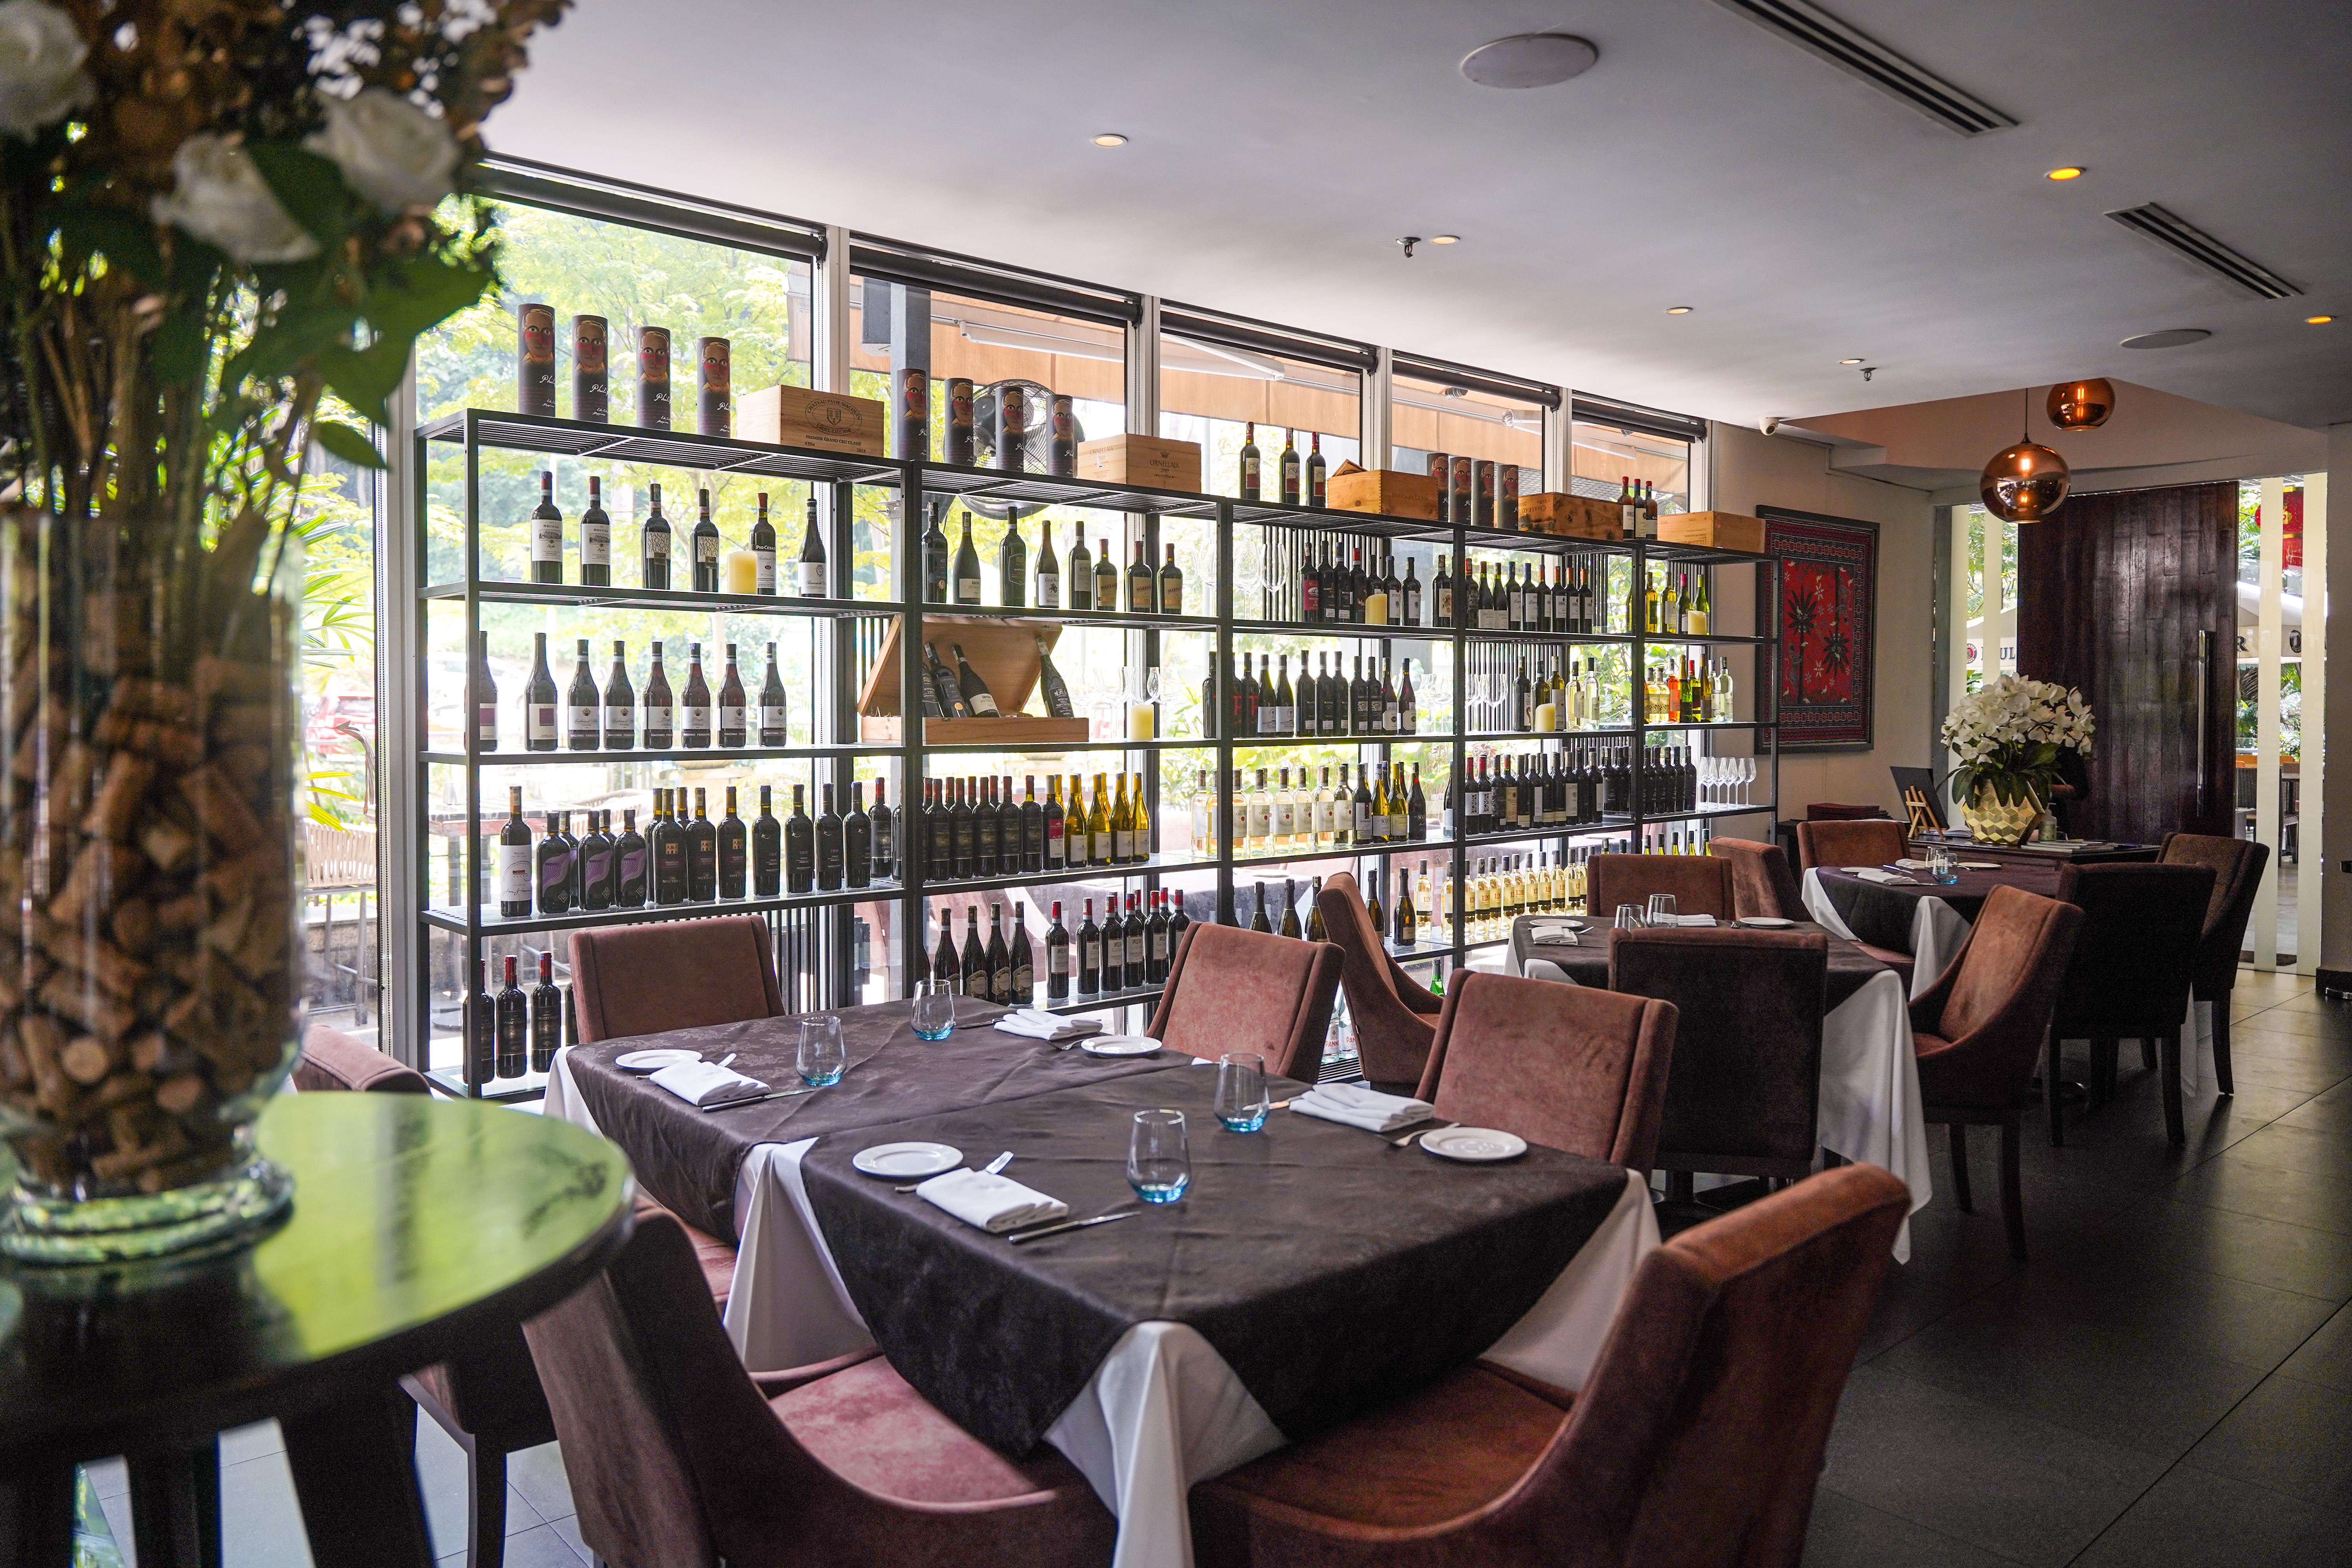 modern italian fine dining in kl: zenzero marks 10 years with refreshed menu & new private lounge